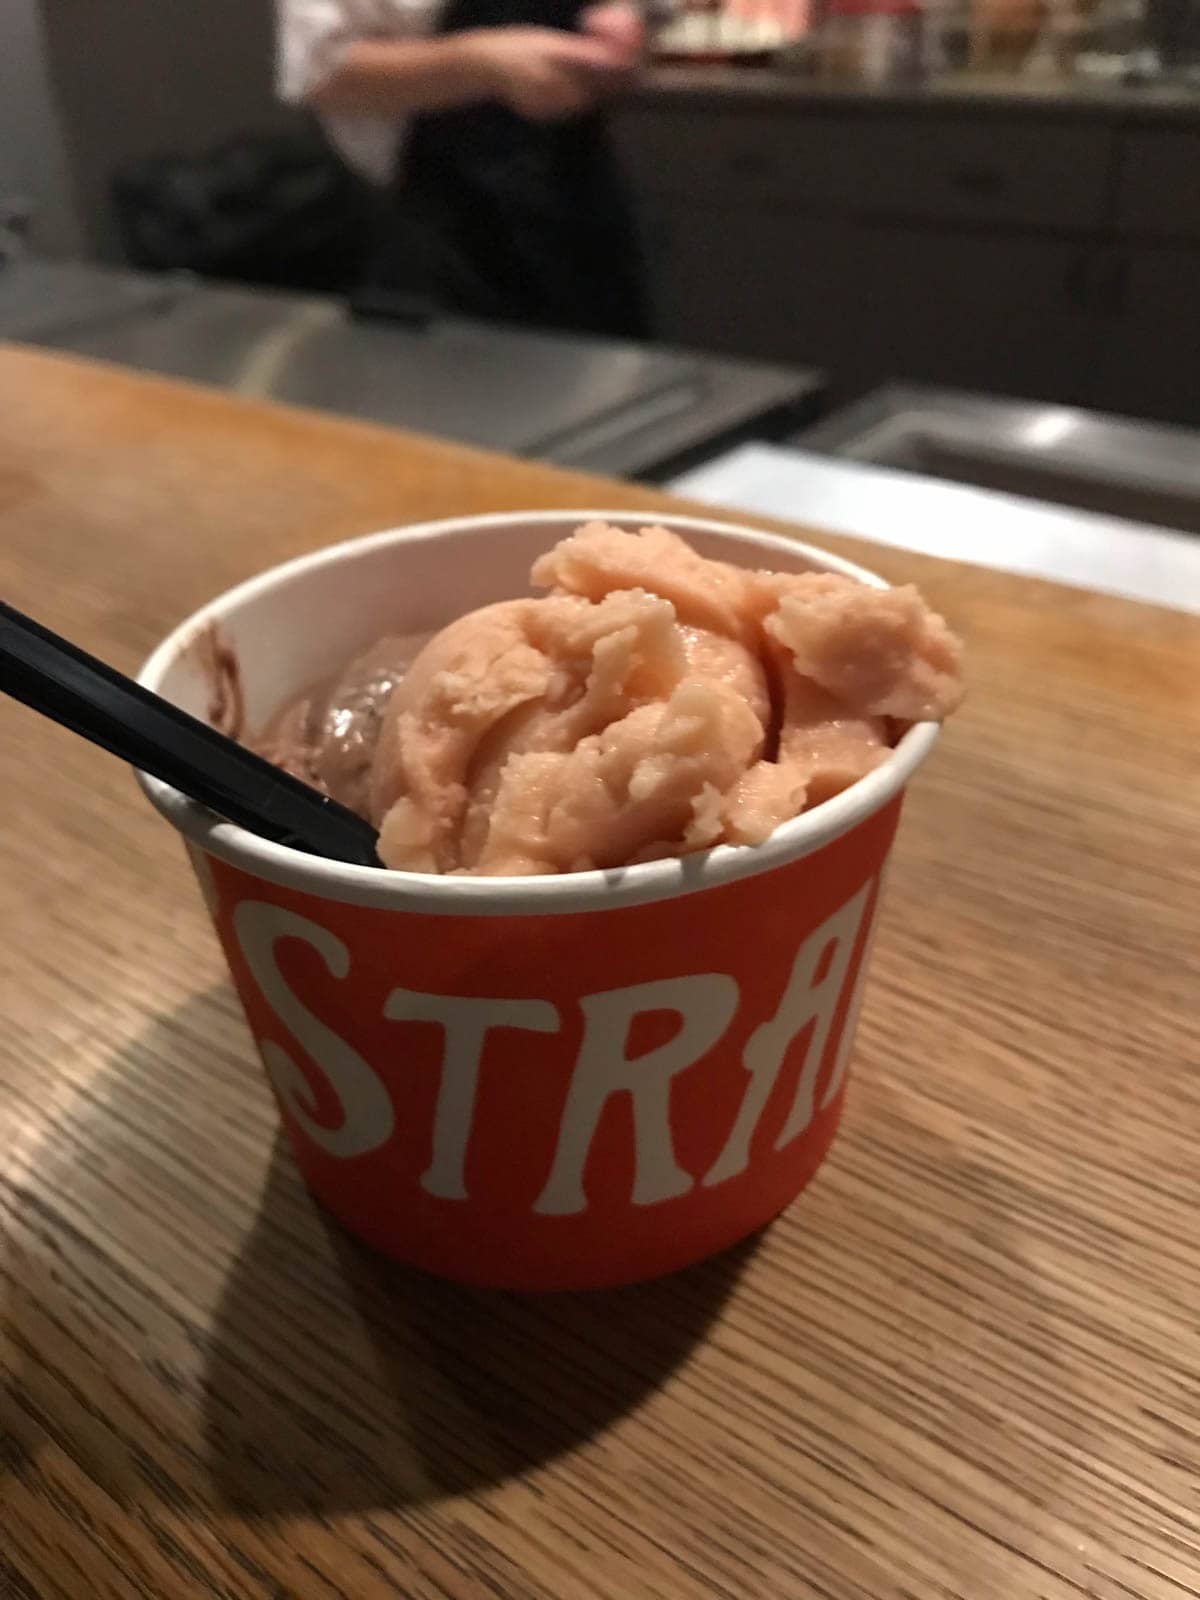 A paper cup with pink ice cream in it. A black spoon sticks out of the cup.